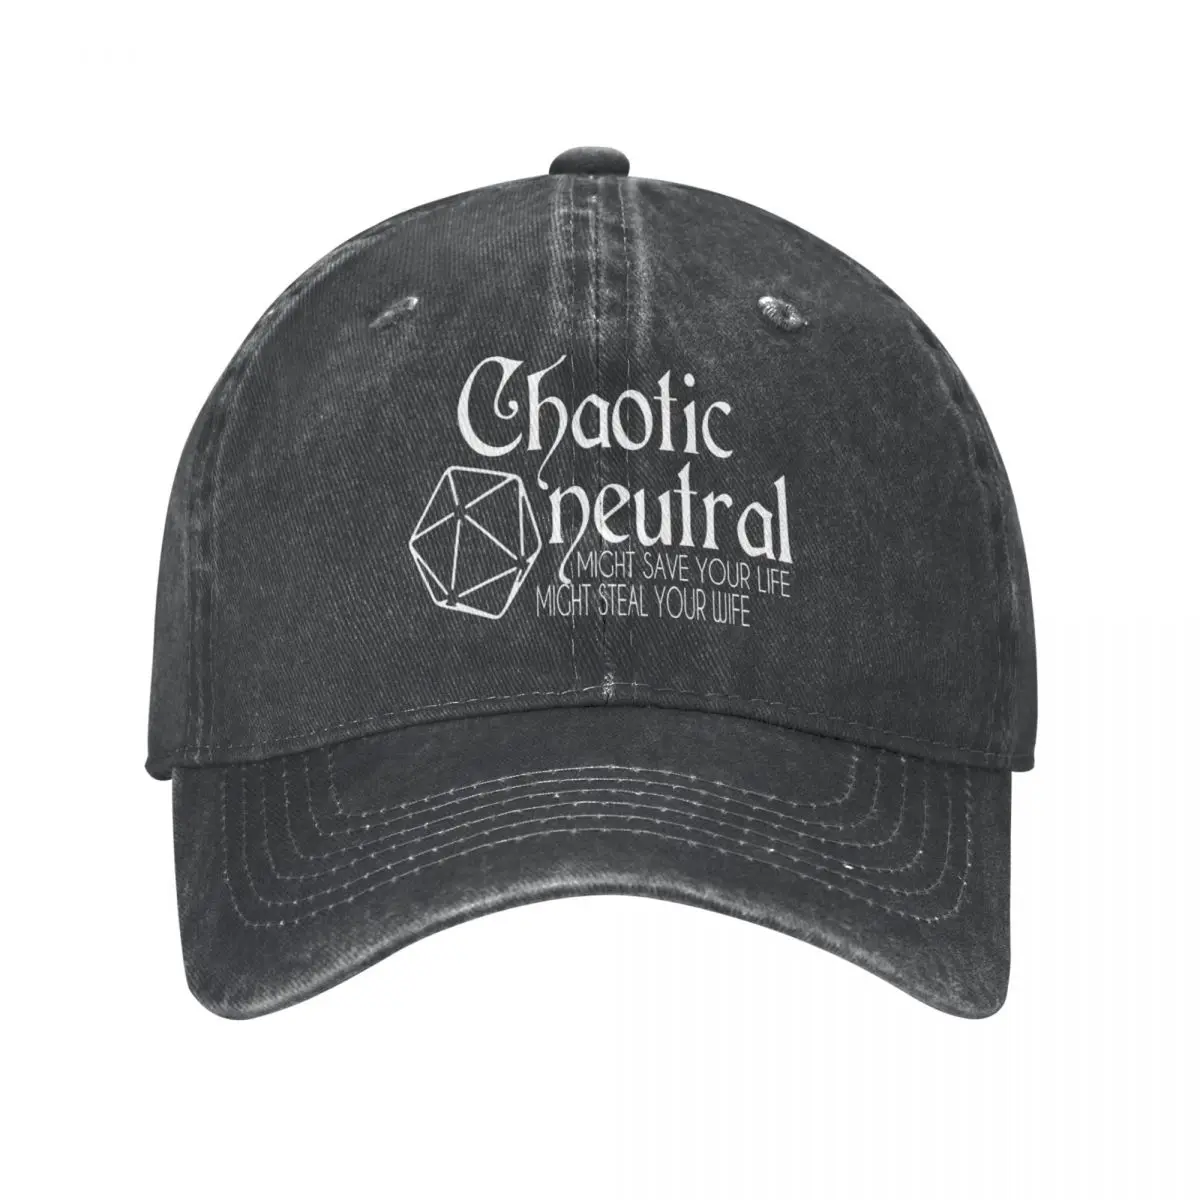 

Chaotic Neutral, Might Save Your Life, Might Steal Your Wife Merch Men Women Baseball Caps Distressed Denim Washed Hats